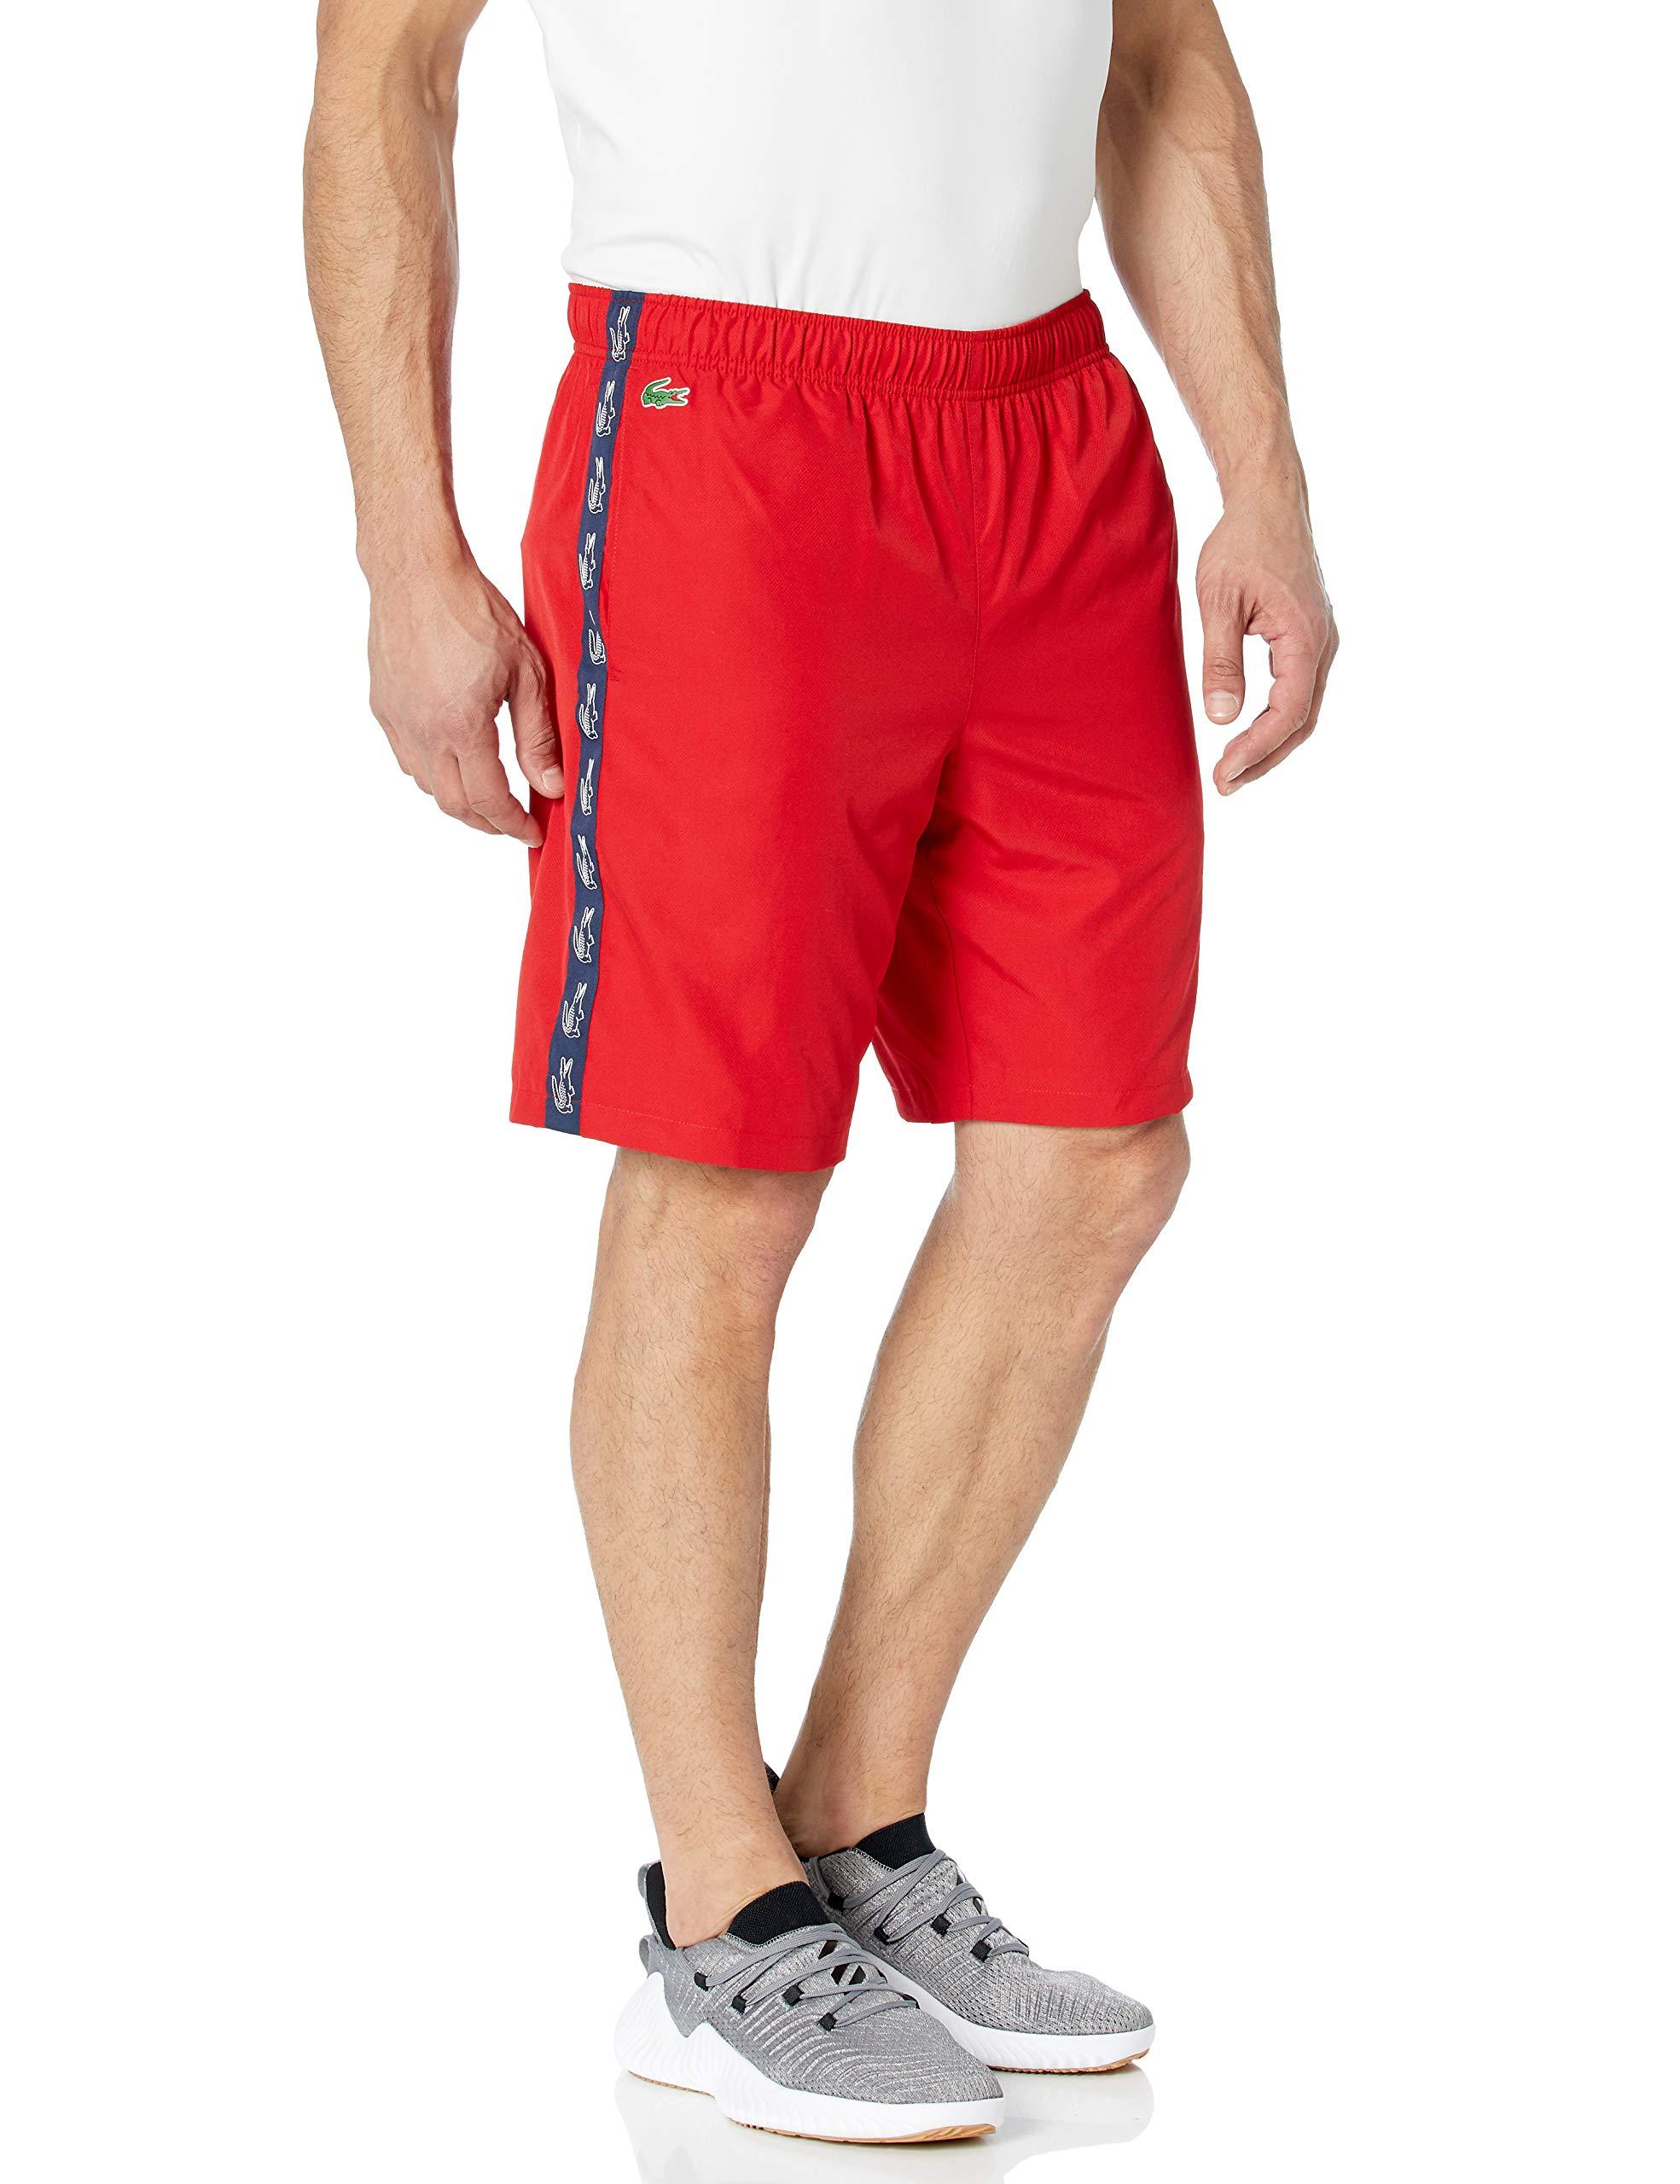 lacoste tape shorts